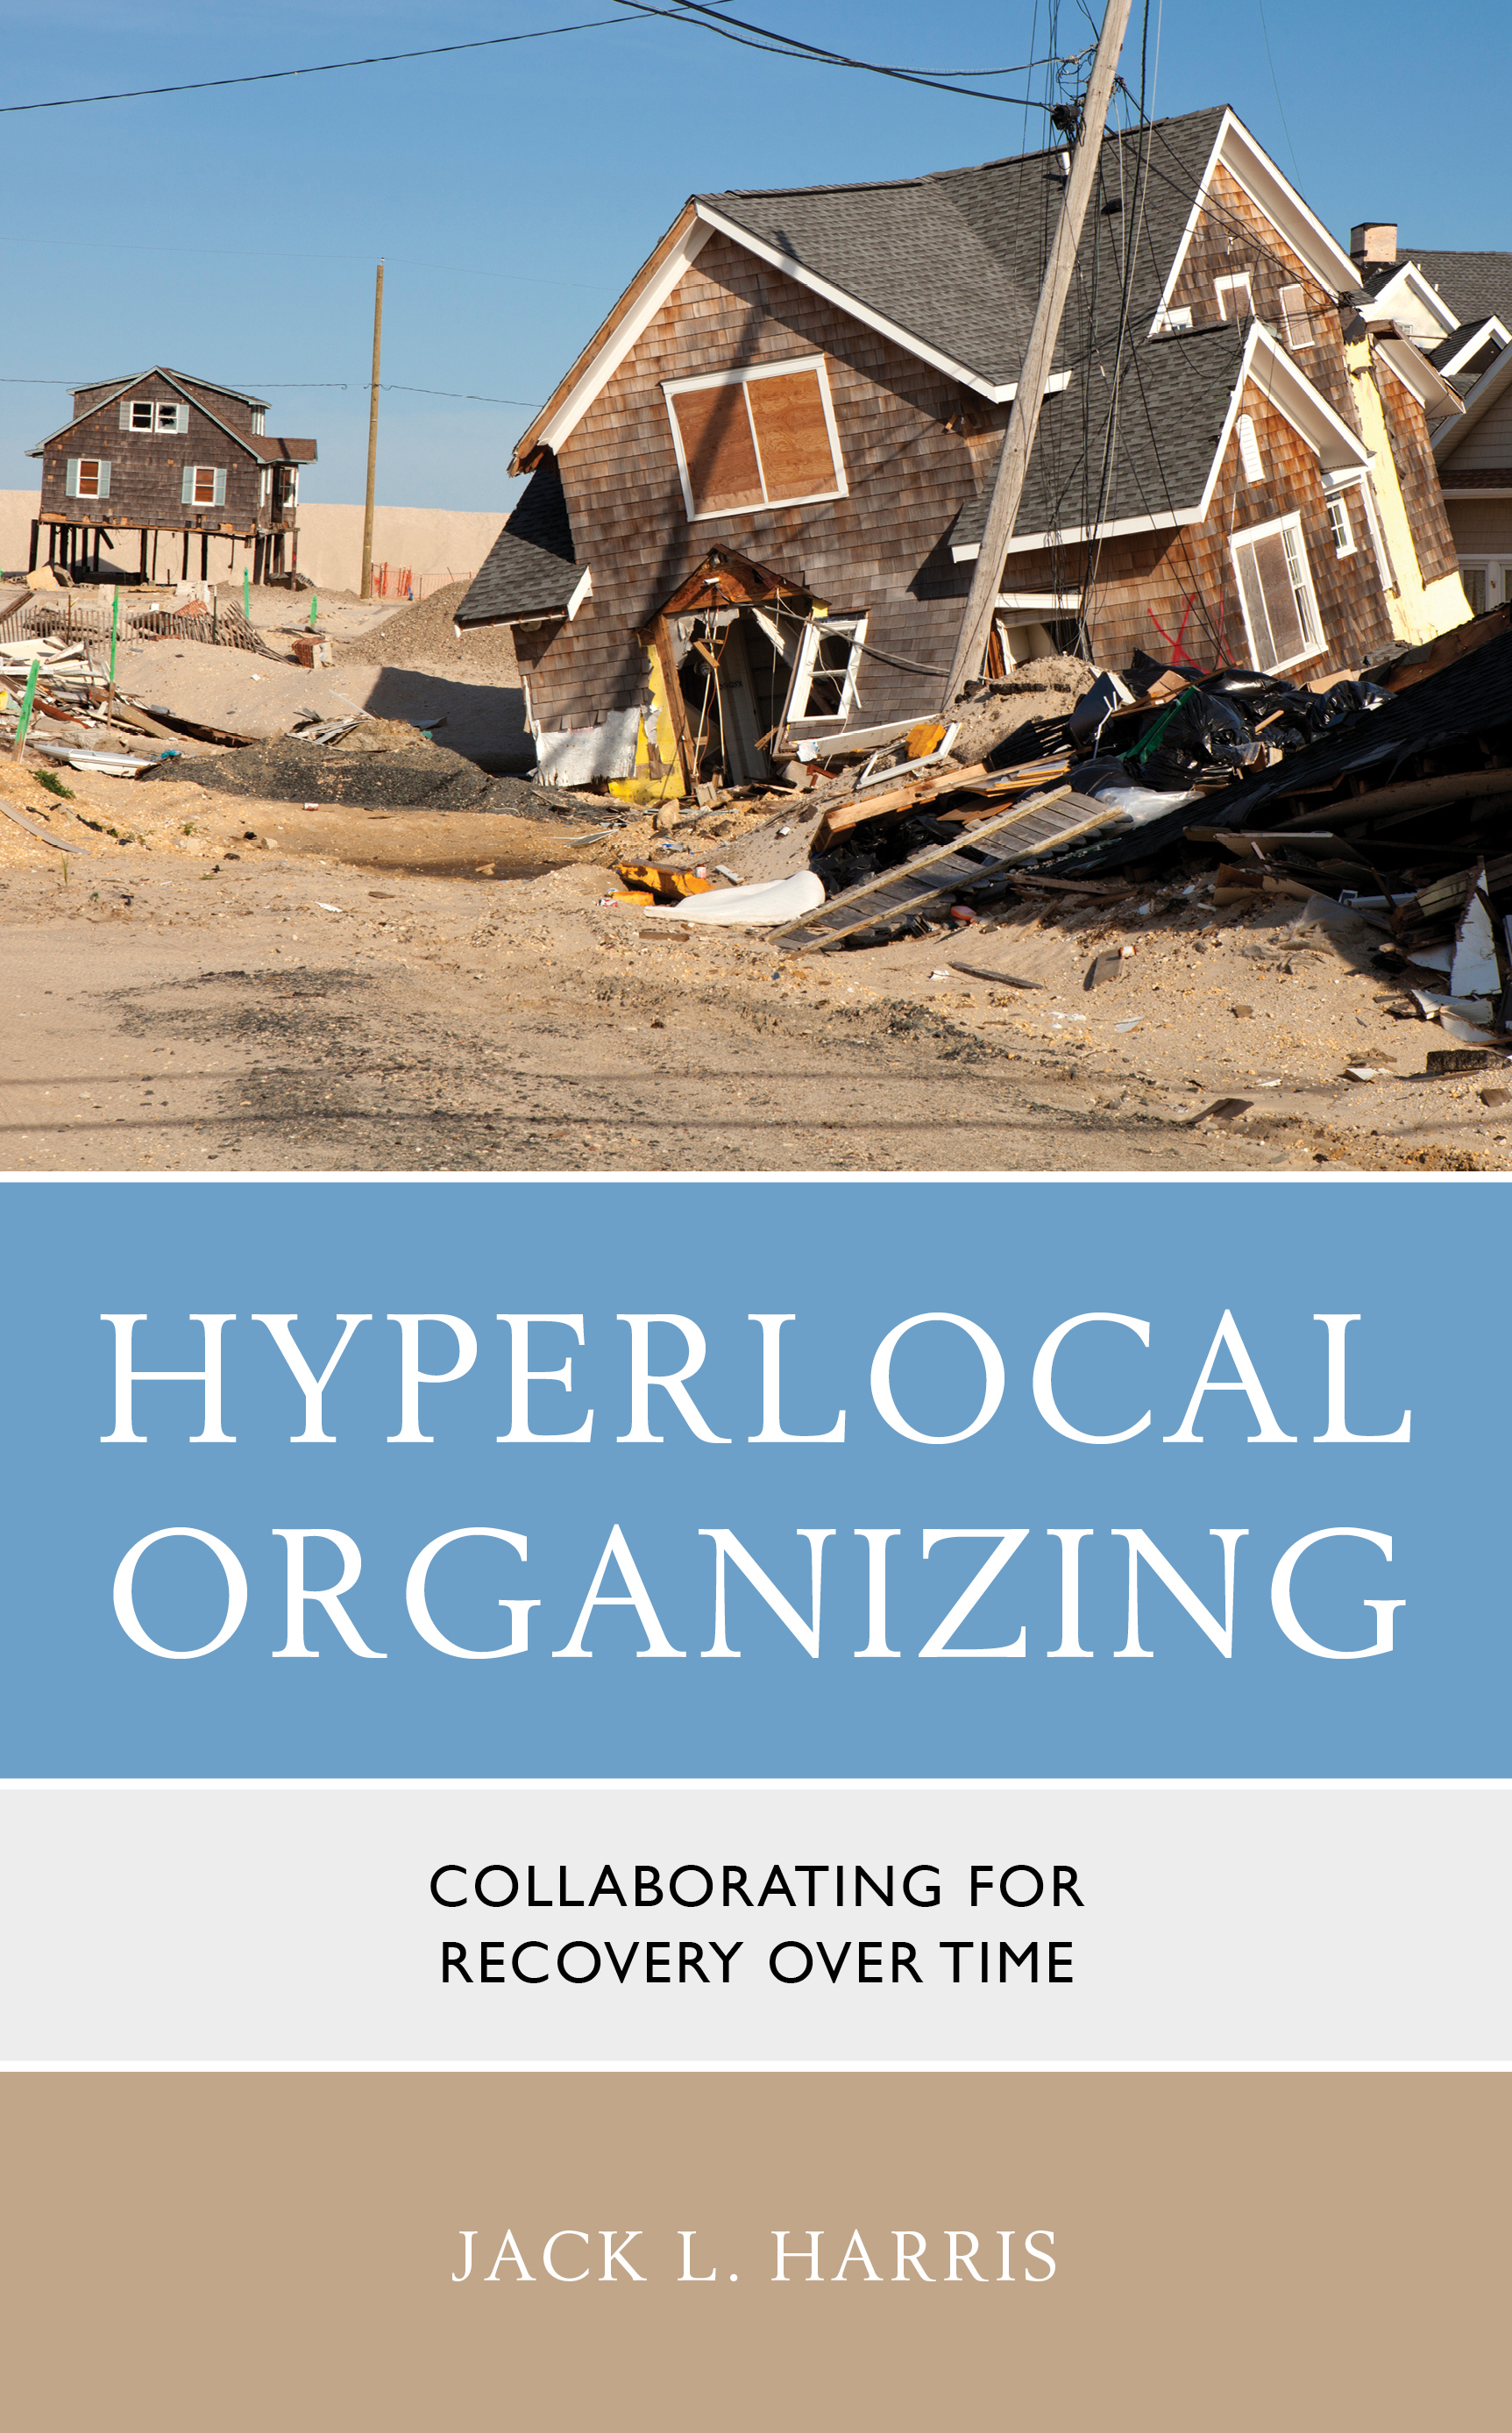 Hyperlocal Organizing: Collaborating for Recovery Over Time